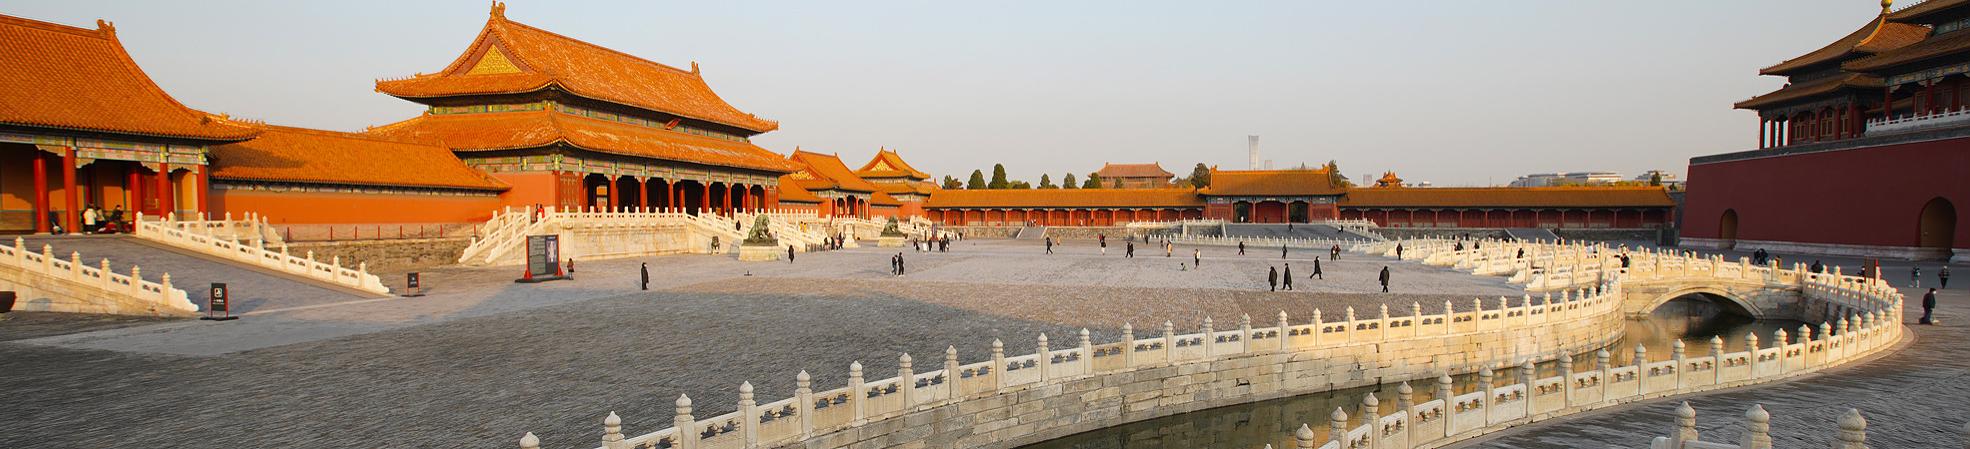 In-depth Beijing City Tours & Holiday Packages